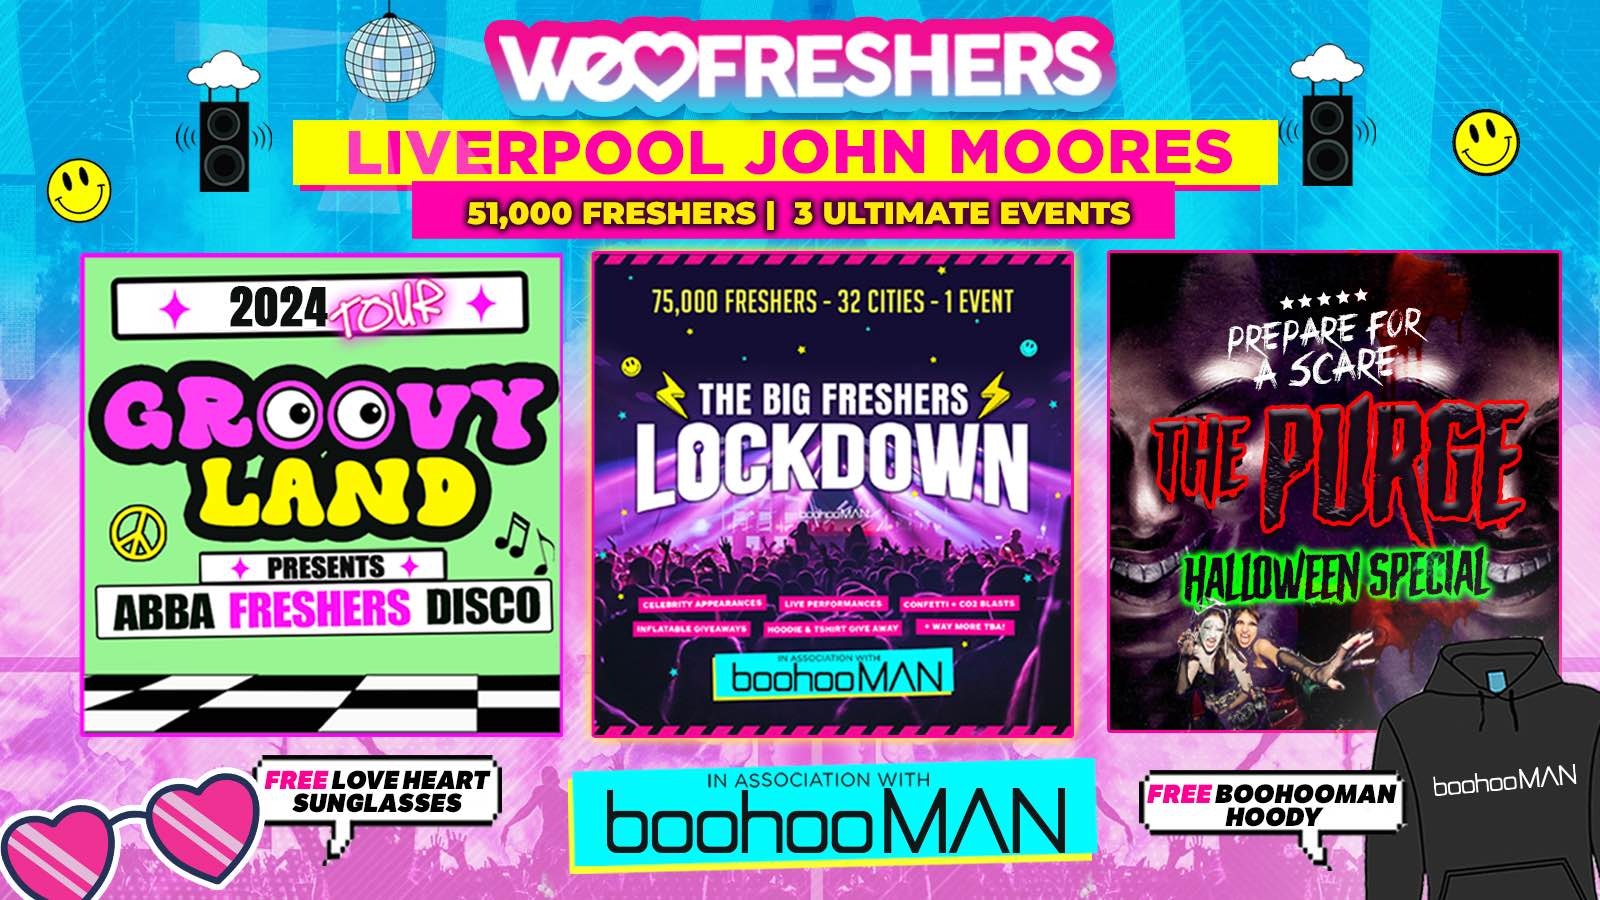 WE LOVE LIVERPOOL JOHN MOORE FRESHERS 2024 in association with boohooMAN ❗3 EVENTS ❗